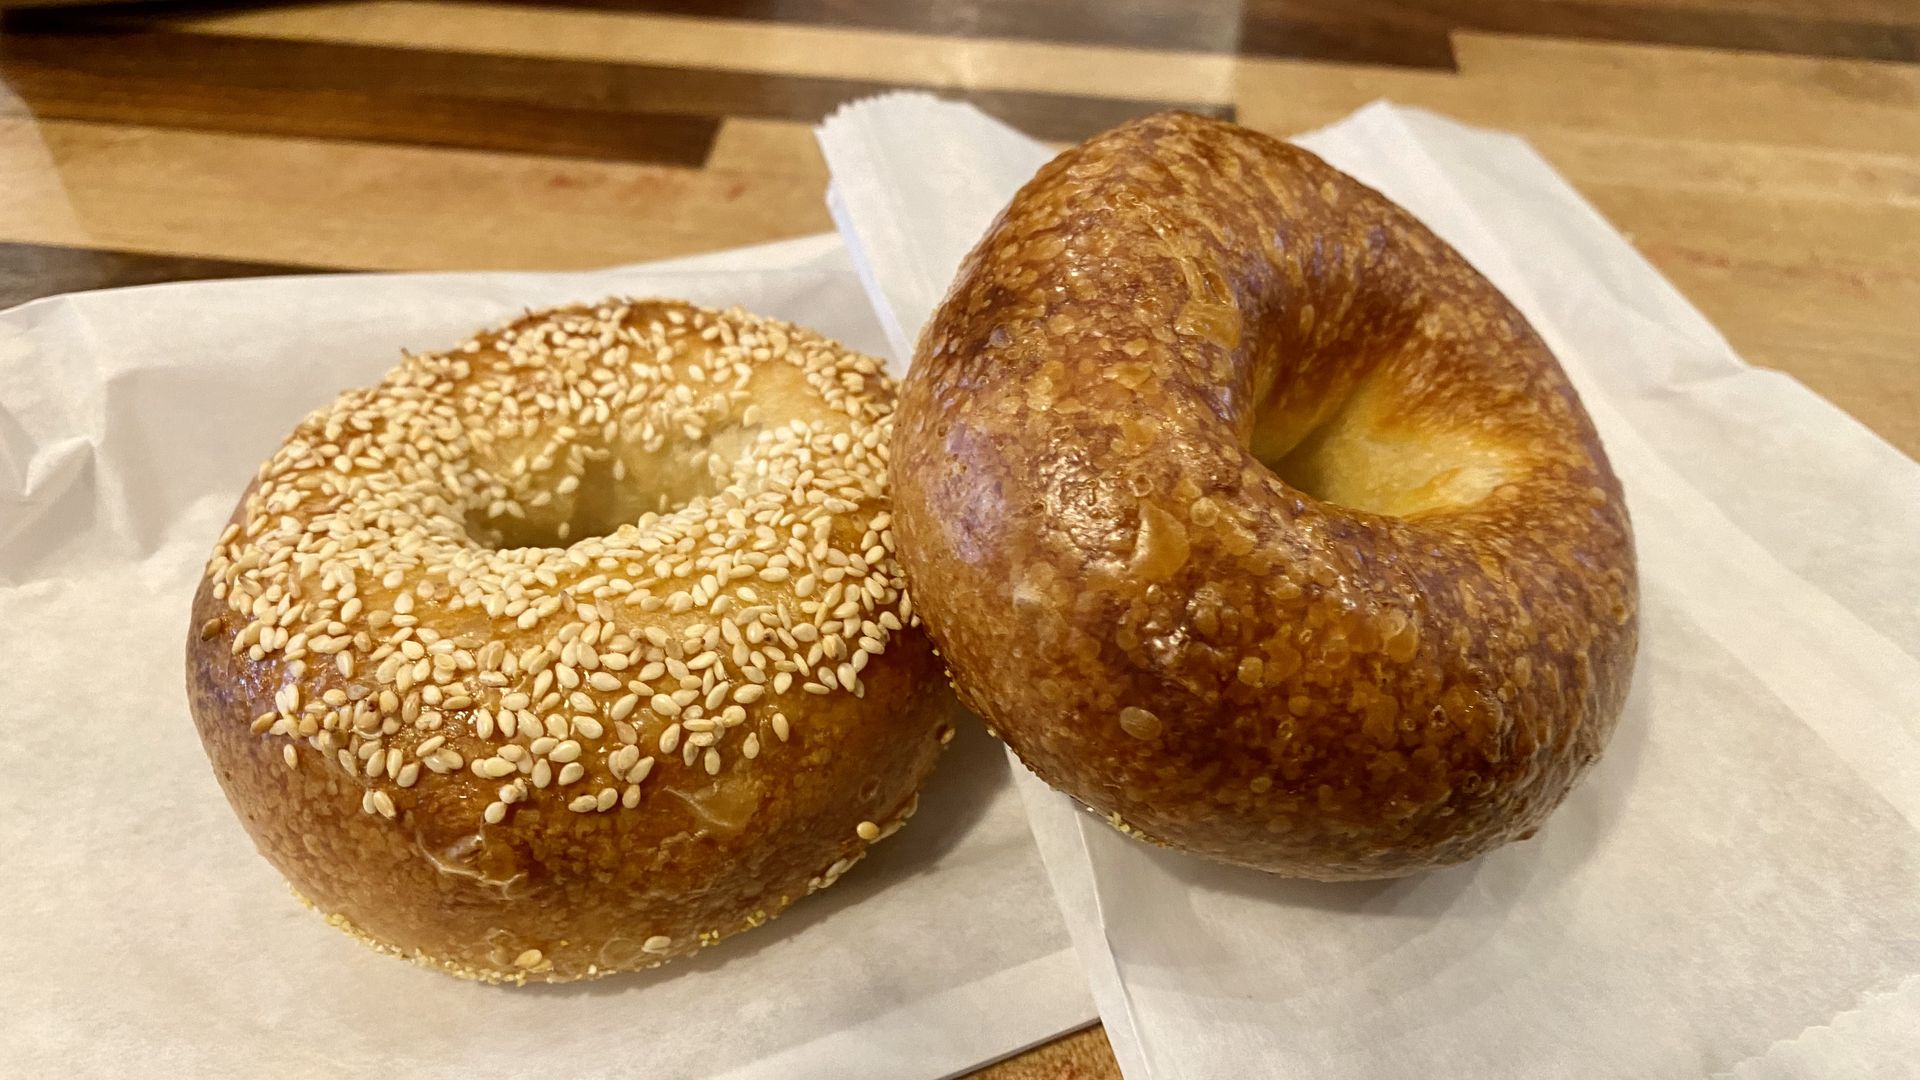 Toasty looking bagels, one plain, one with sesame, on a paper sleeves atop a wooden table.